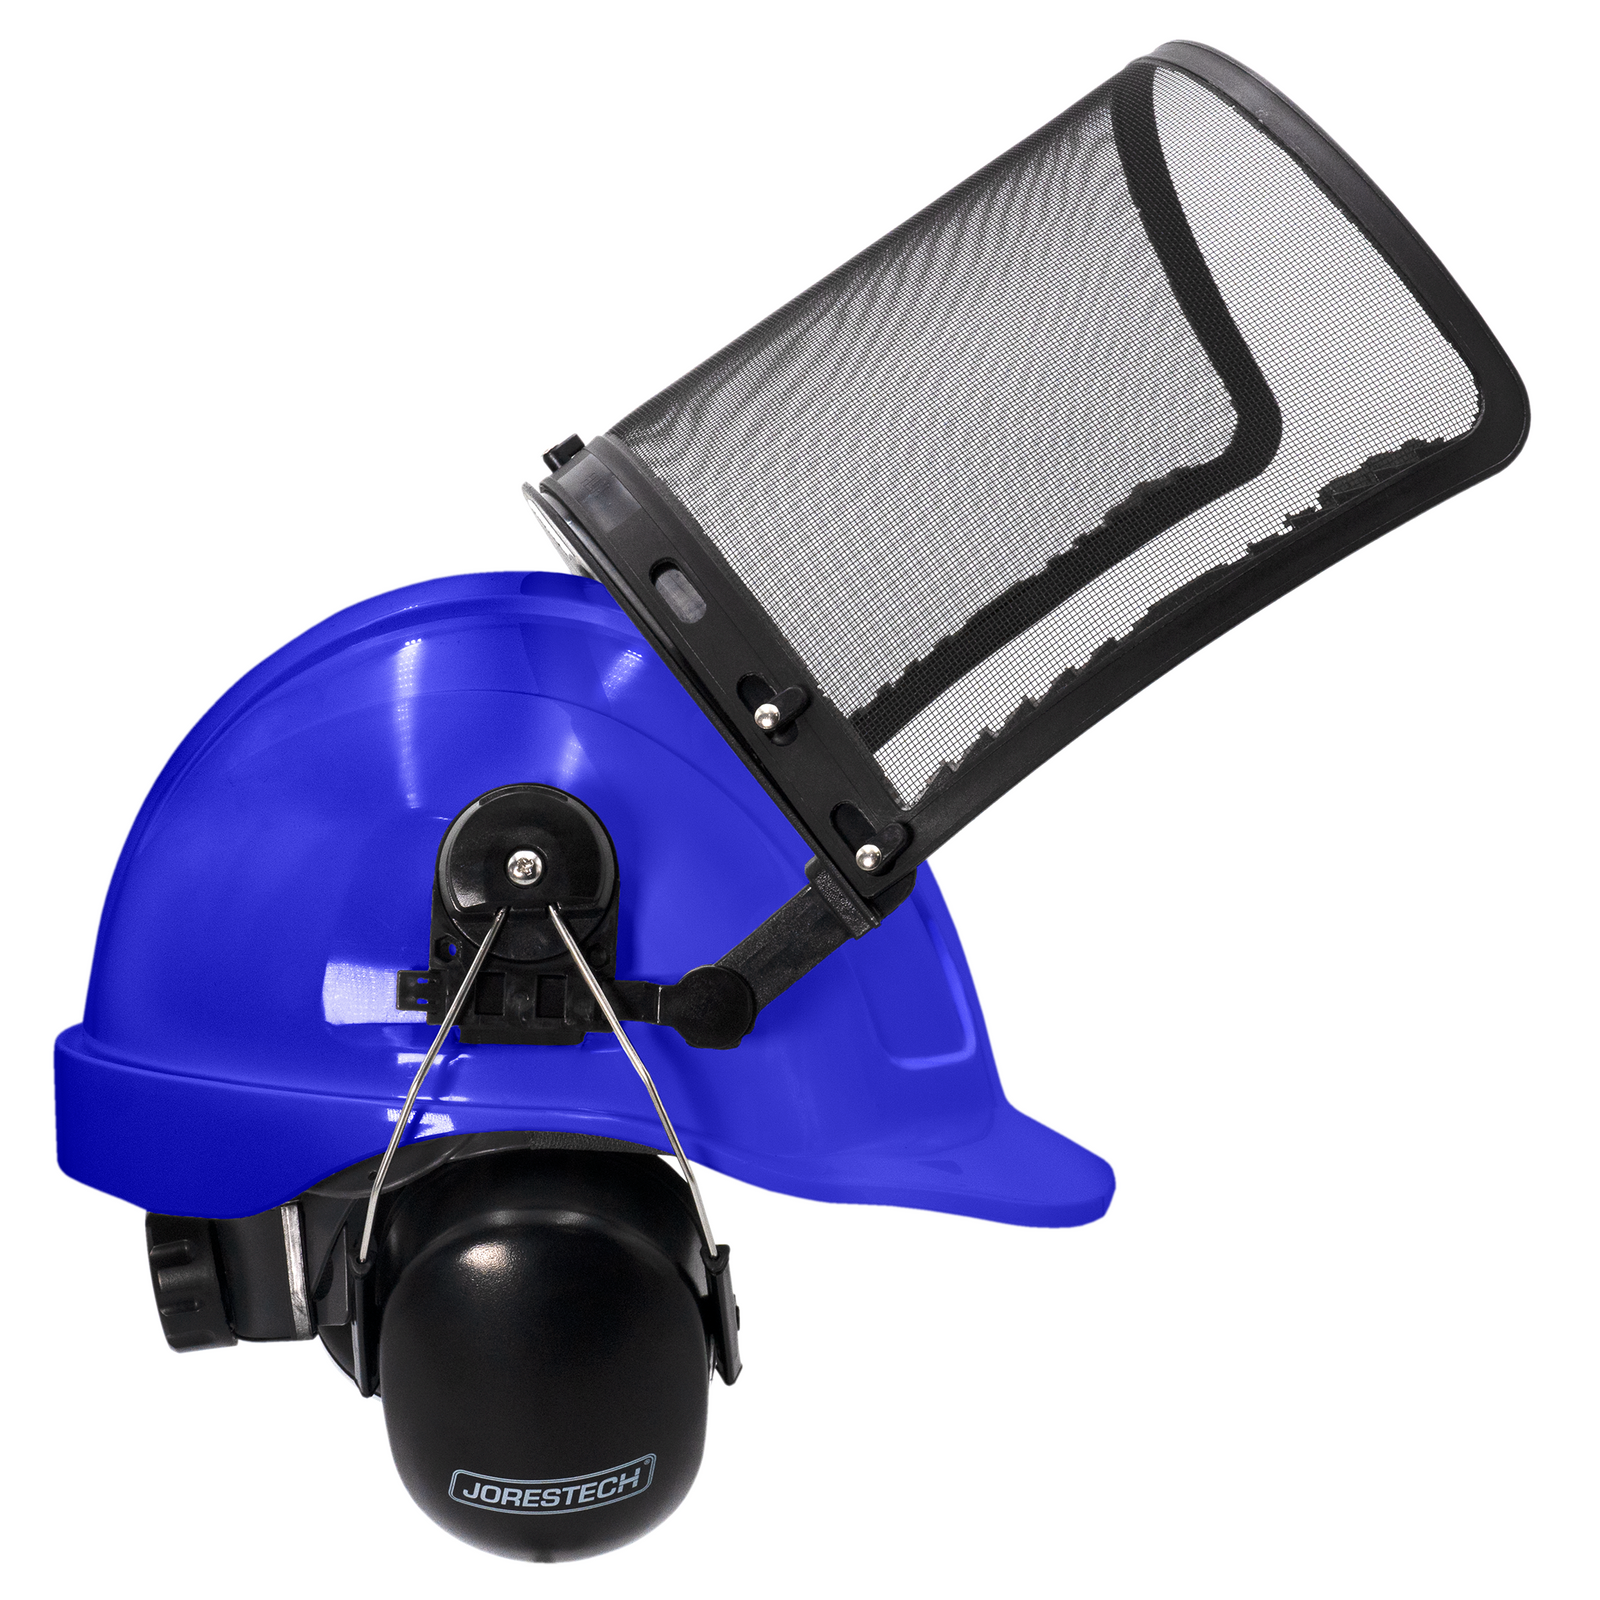 Blue safety cap style hard hat kit with iron mesh face shield and earmuffs for hearing protection